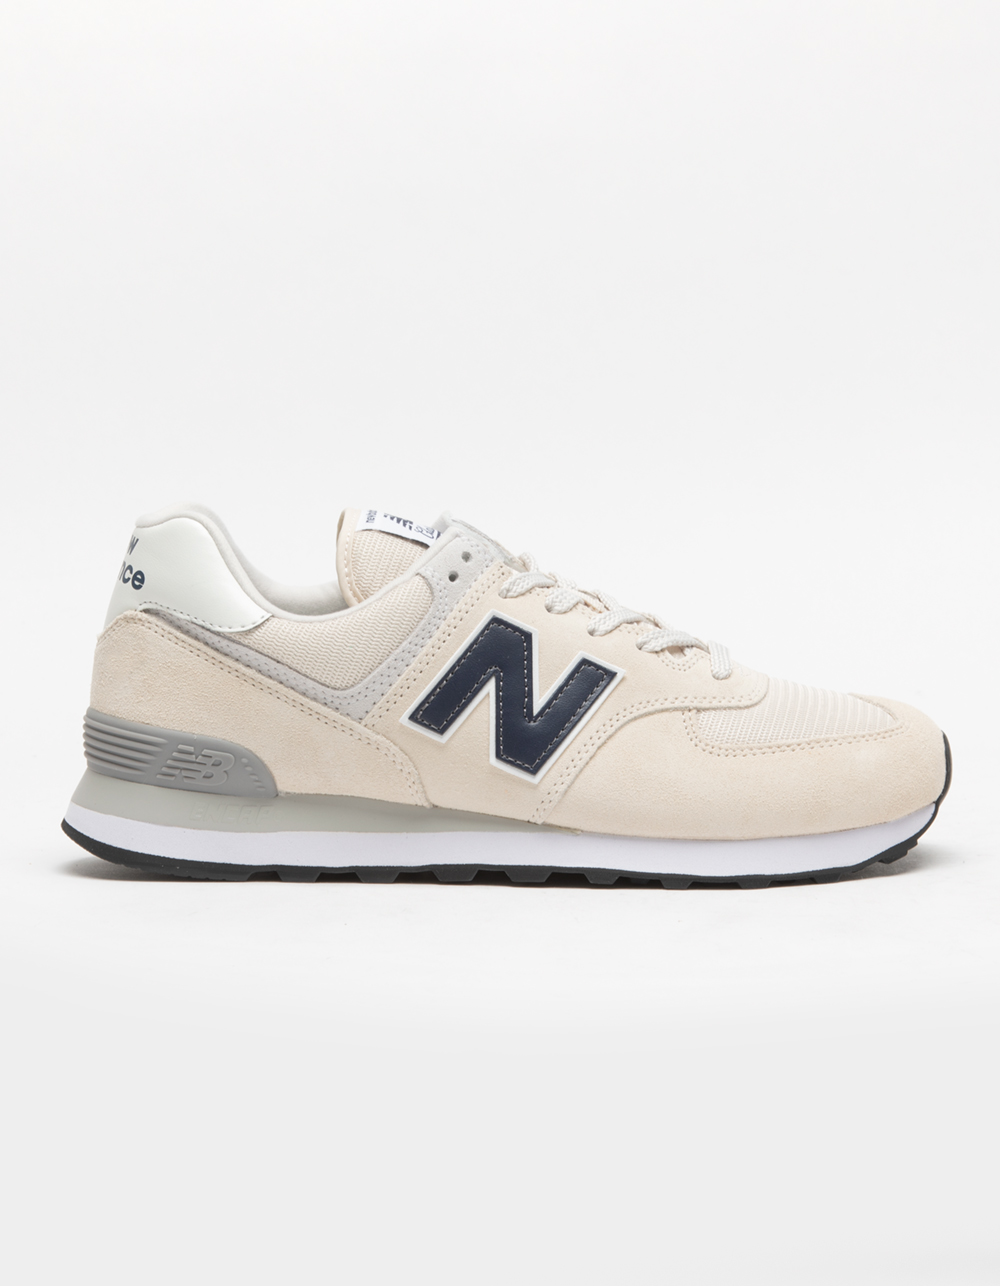 Ezel frequentie cafe NEW BALANCE 574 Mens Shoes - NAVY COMBO | Tillys